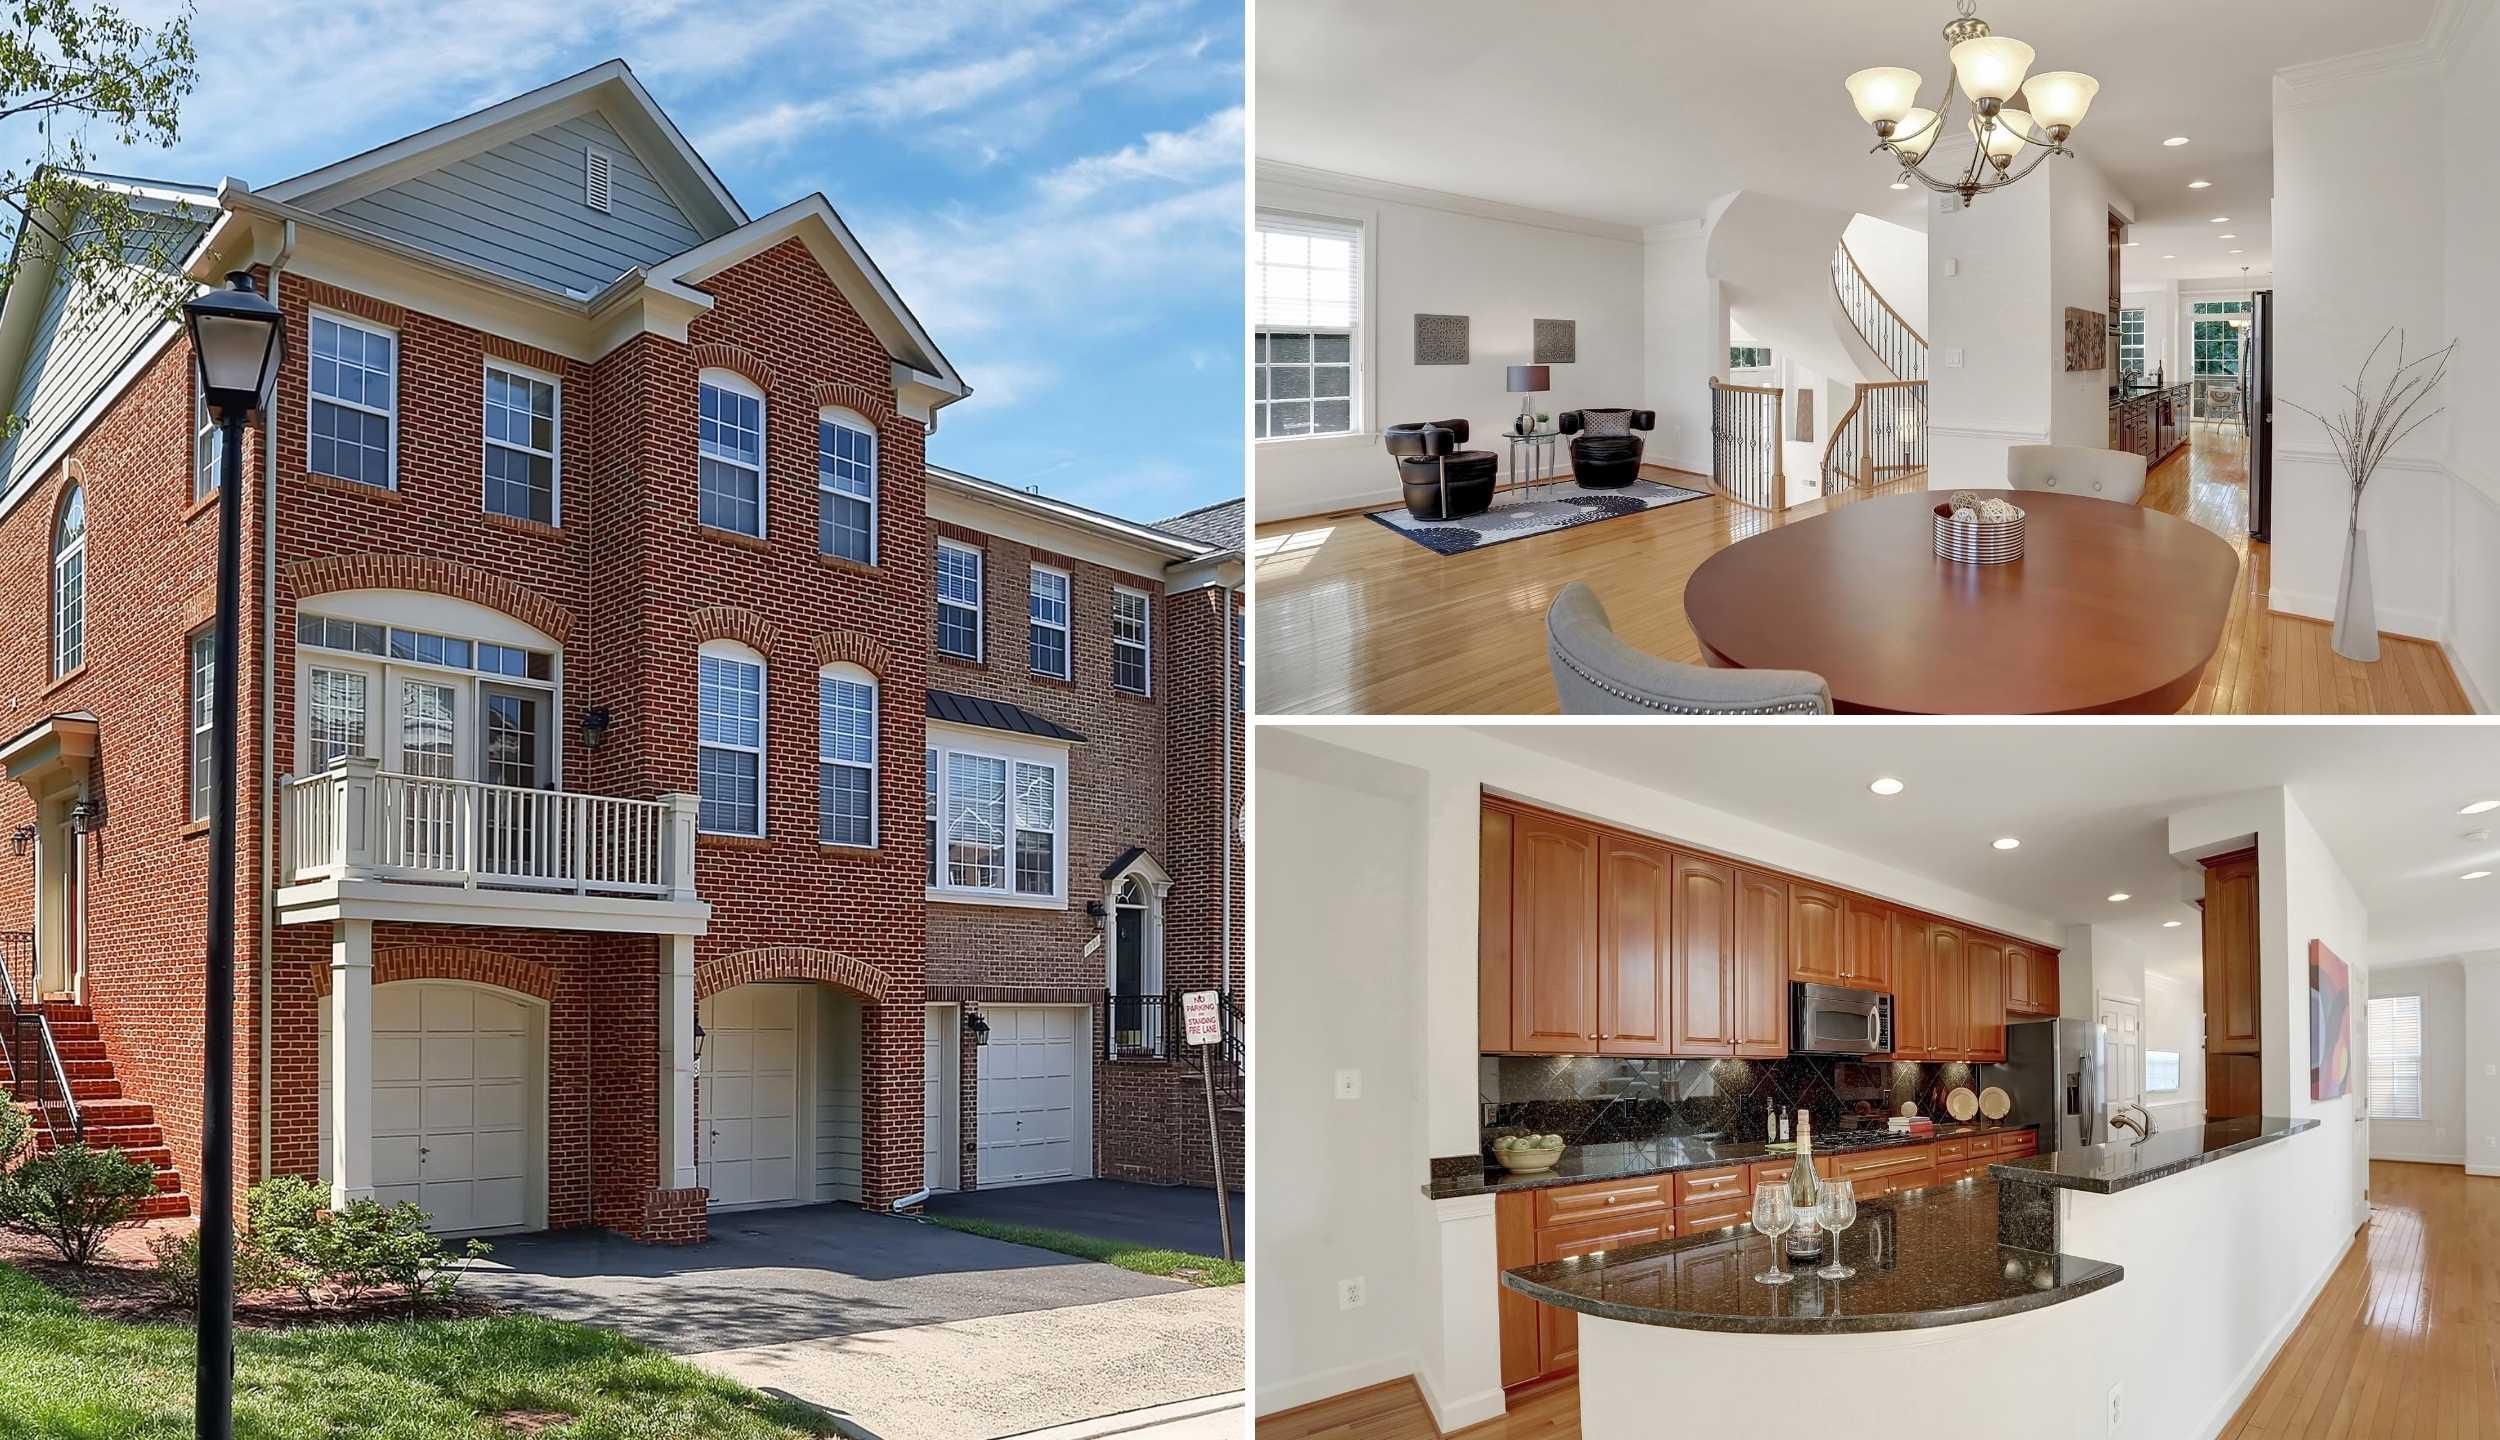 SOLD For the Highest Price This Community in Fairfax, VA, Has EVER Seen!